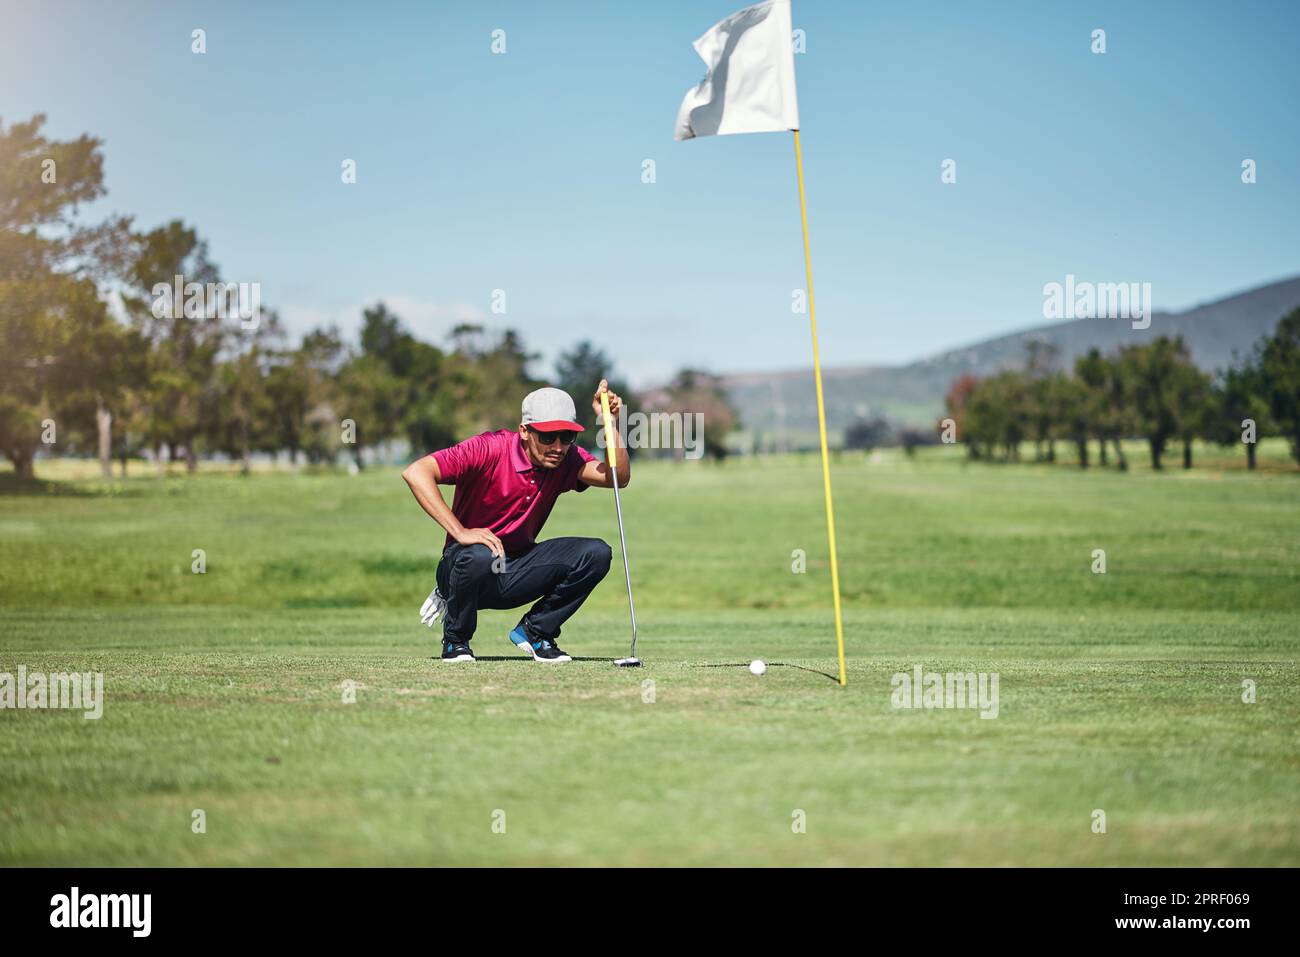 Why wont you go in. a focused young male golfer looking at a golf ball while being seated on the grass outside during the day. Stock Photo